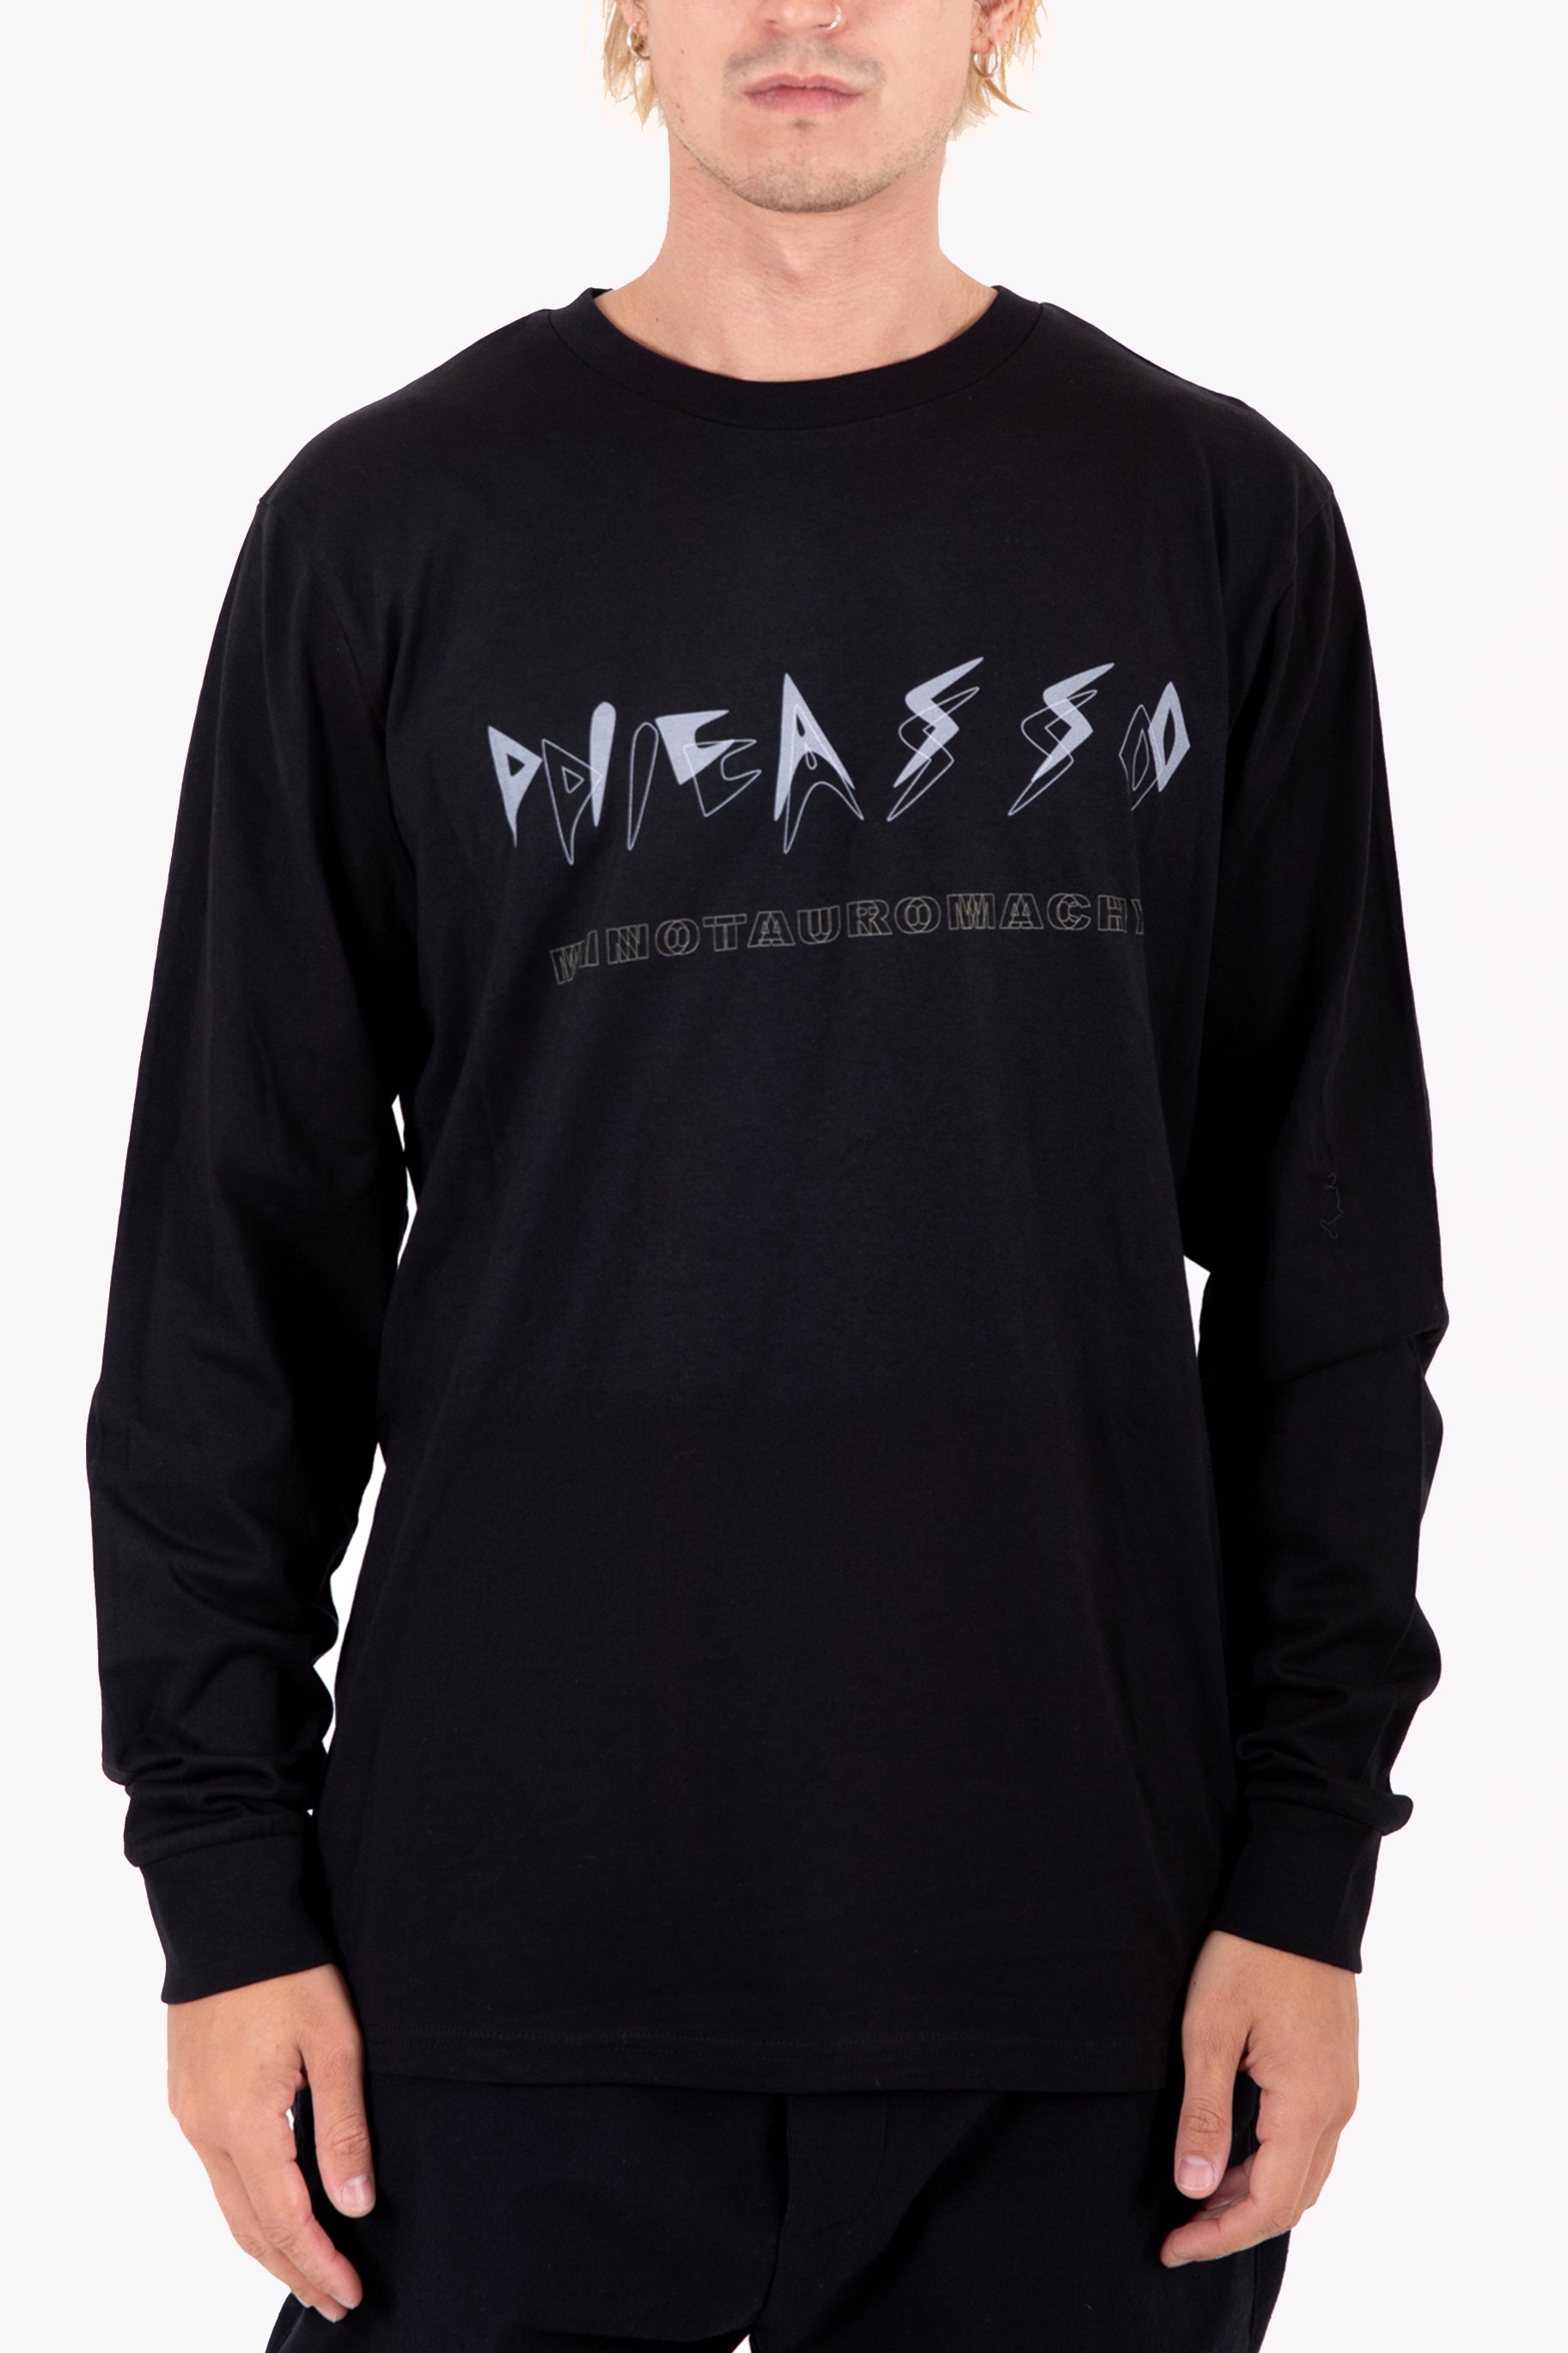 Picasso "Minotauromachy" Longsleeve Tee